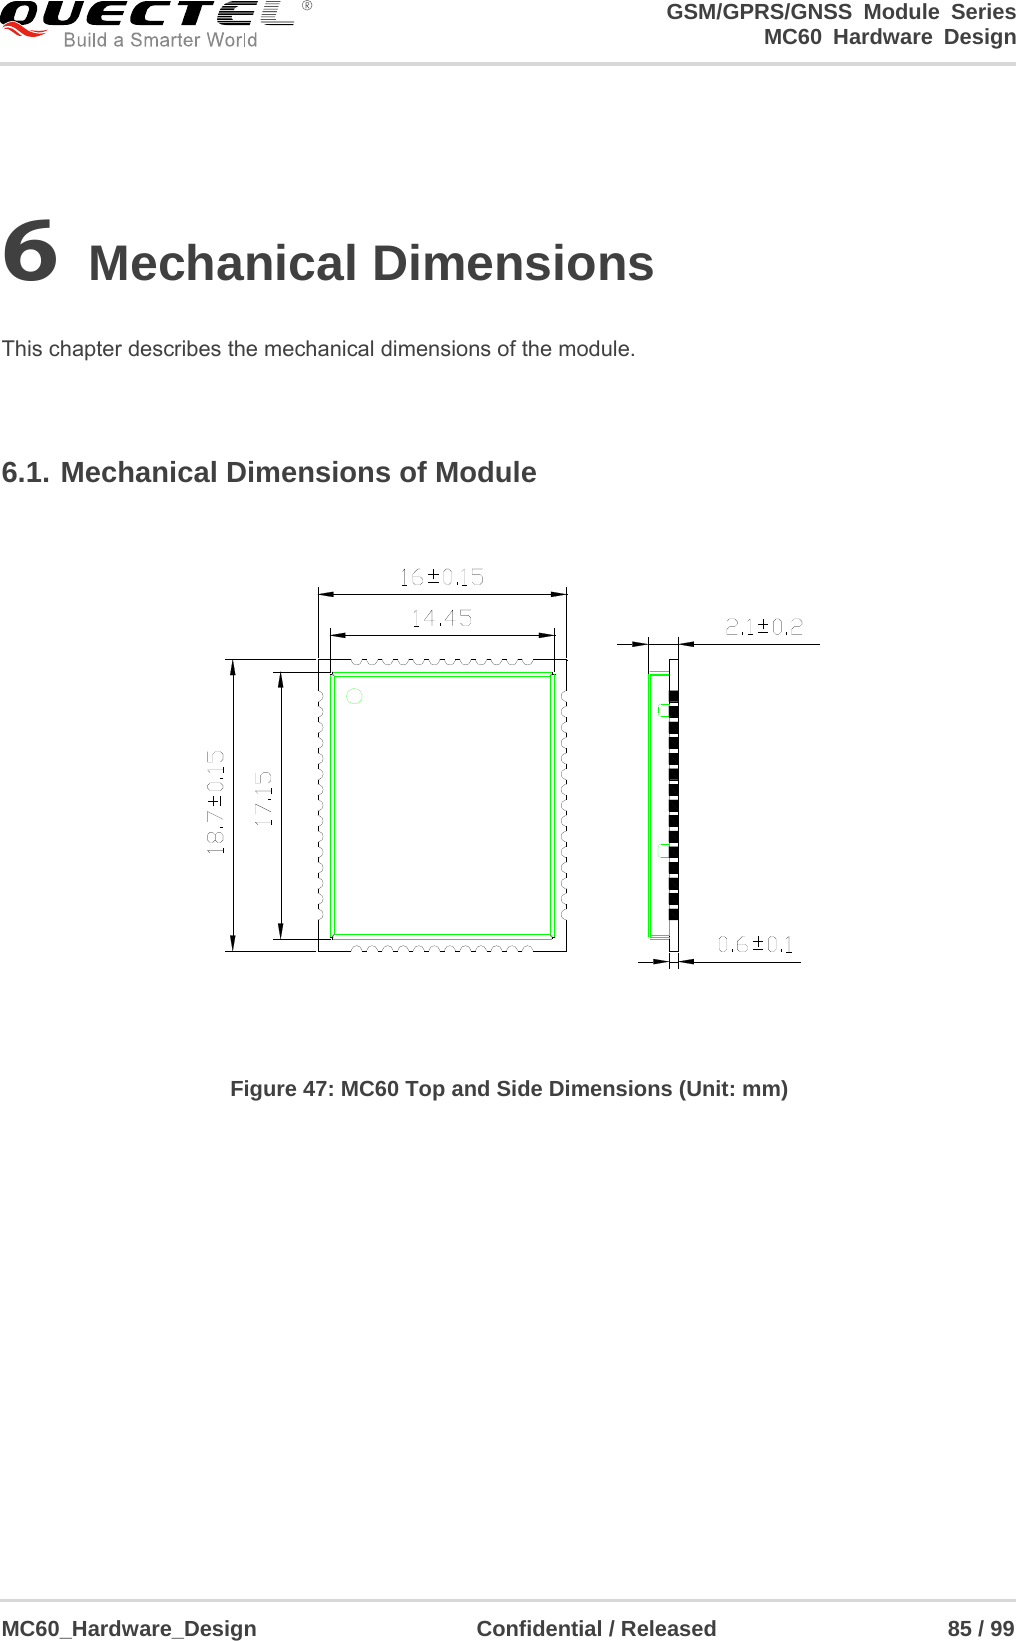                                                                     GSM/GPRS/GNSS Module Series                                                                 MC60 Hardware Design  MC60_Hardware_Design                    Confidential / Released                     85 / 99     6 Mechanical Dimensions  This chapter describes the mechanical dimensions of the module.  6.1. Mechanical Dimensions of Module  Figure 47: MC60 Top and Side Dimensions (Unit: mm)              